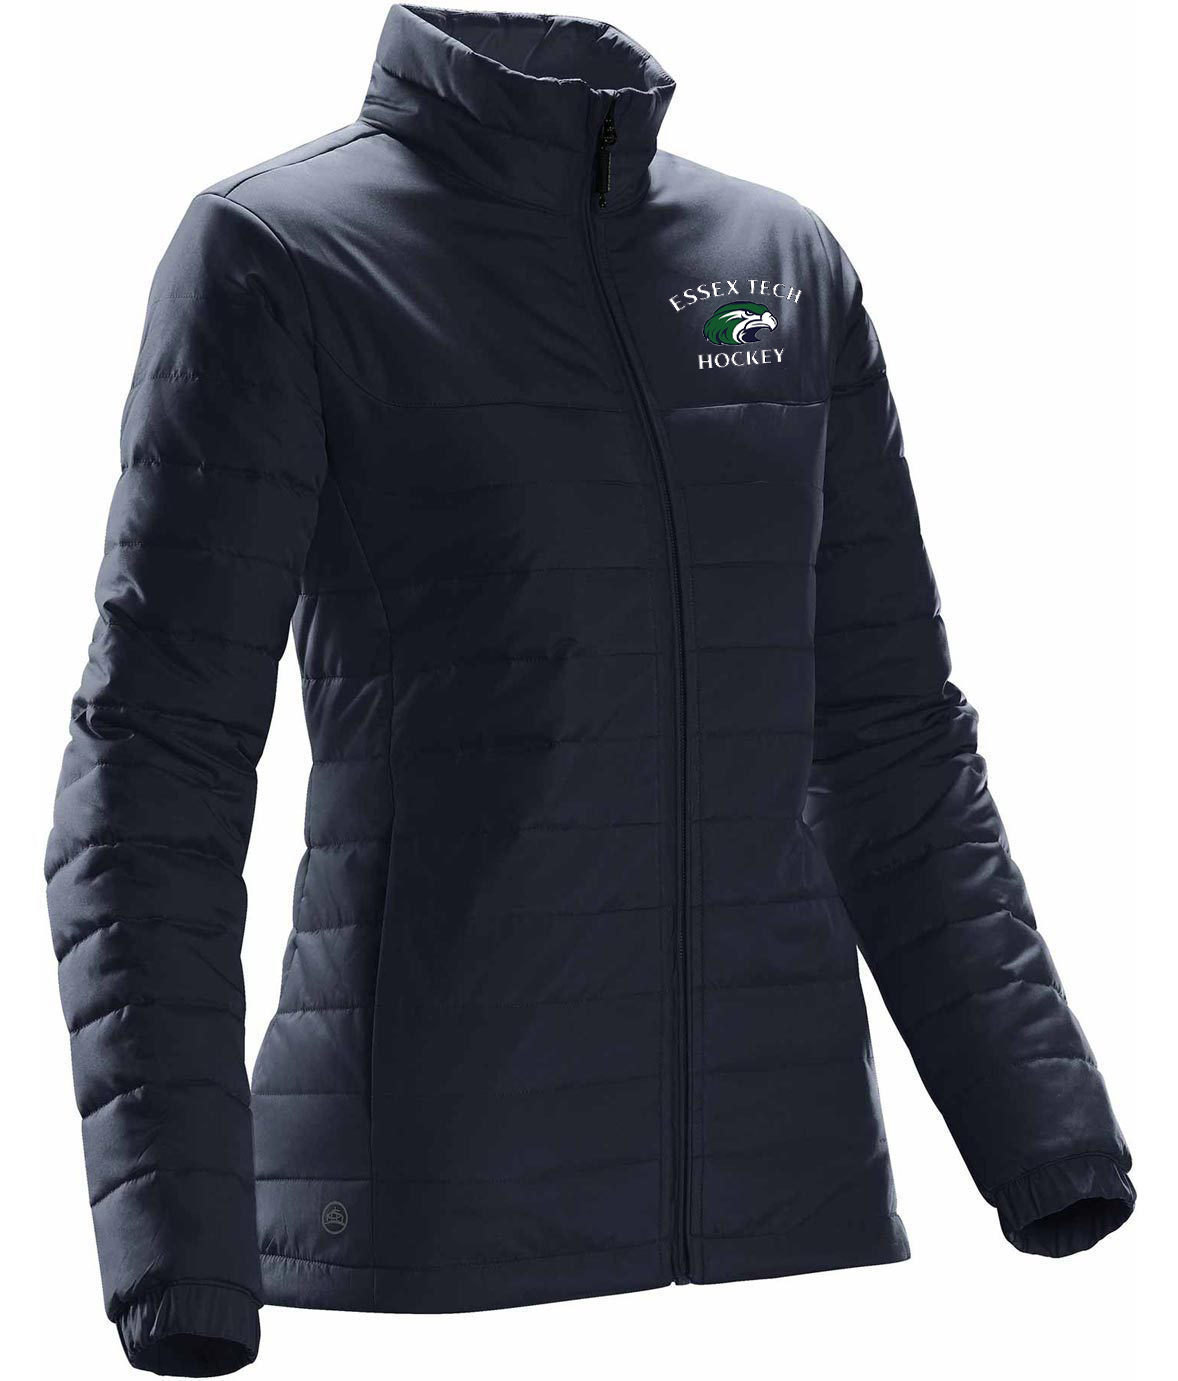 Women's Nautilus Quilted Jacket - All Around Active